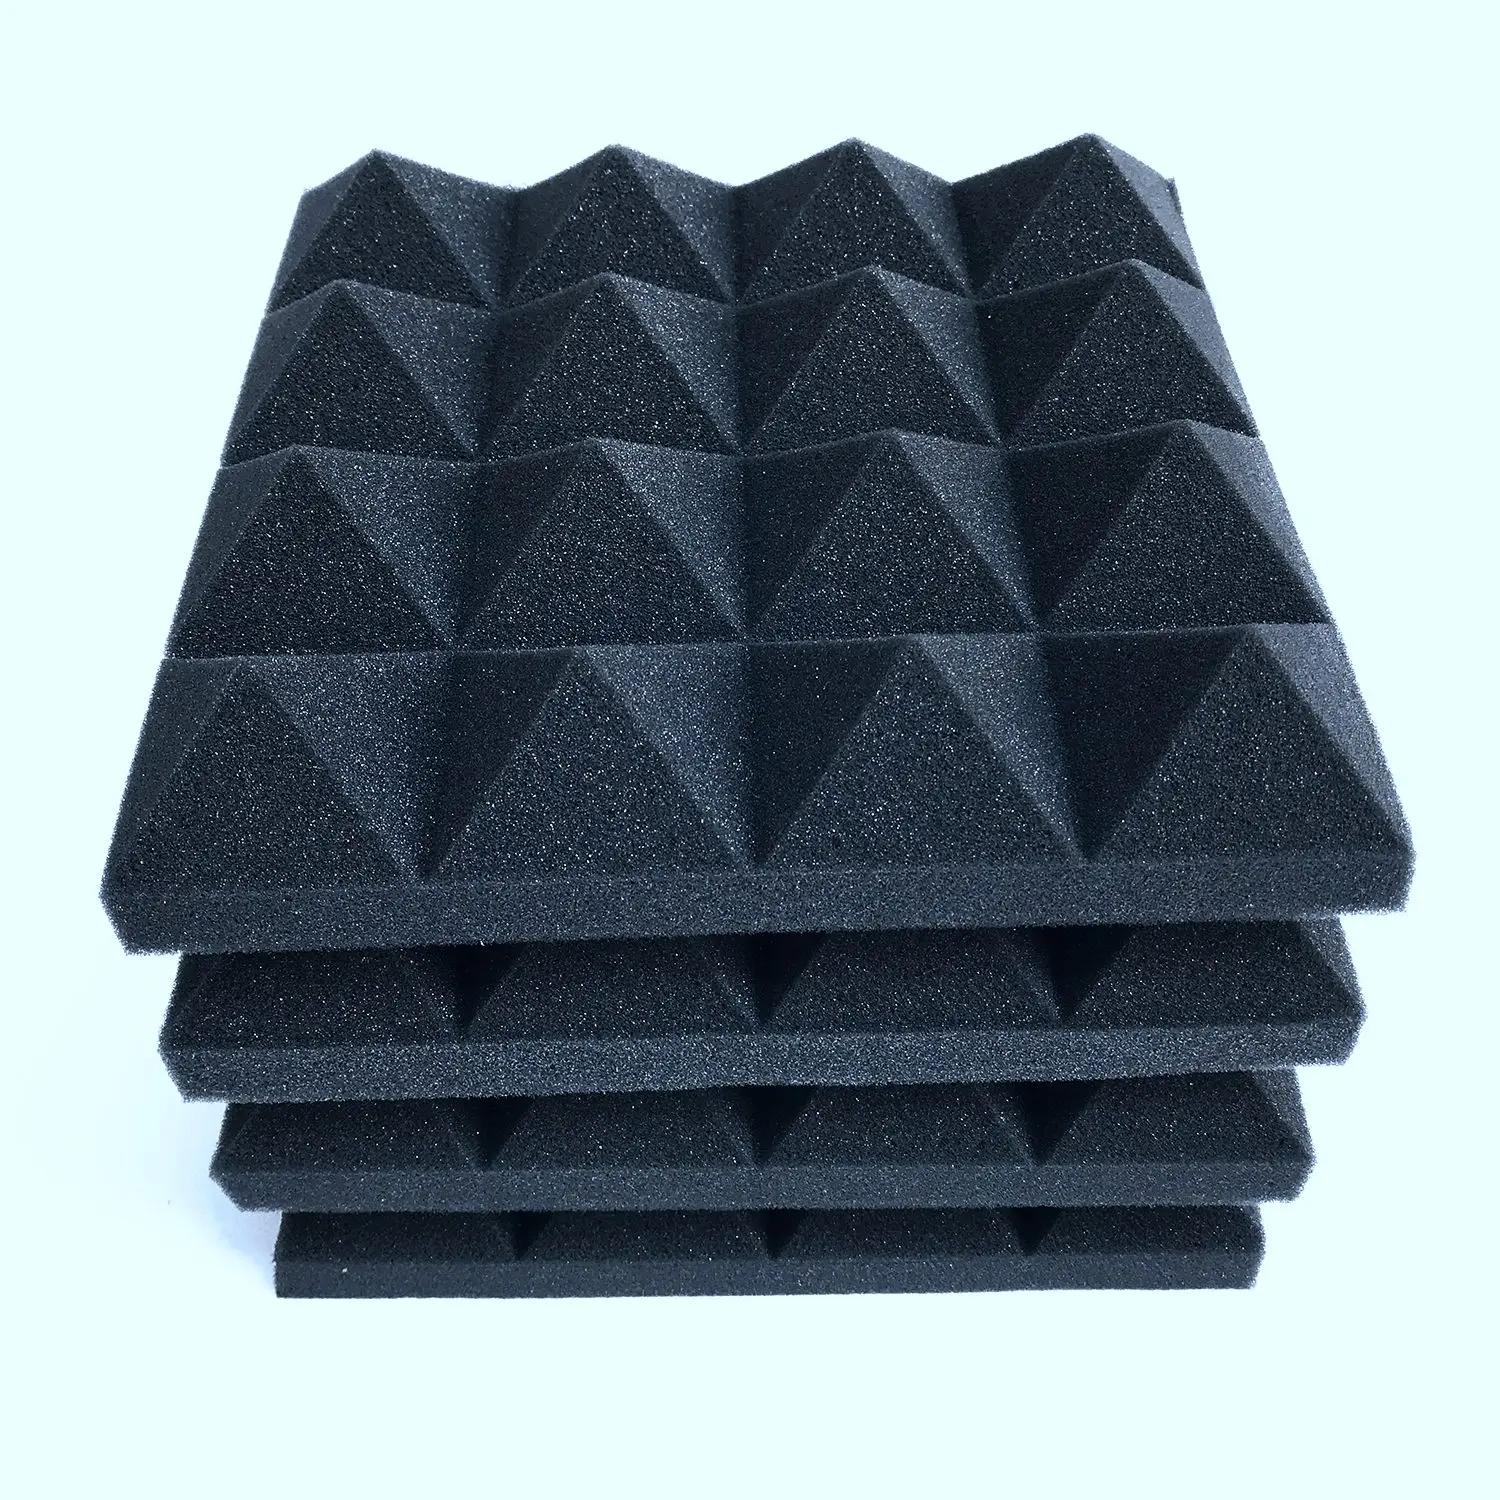 12 pack Acoustic Panels With Self-Adhesive Acoustic Foam Wedges High Density Soundproof Wall Panels for Home Studio,Carbon Black 1 X 12 X 12 Quick-Recovery Sound Proof Foam Panels 